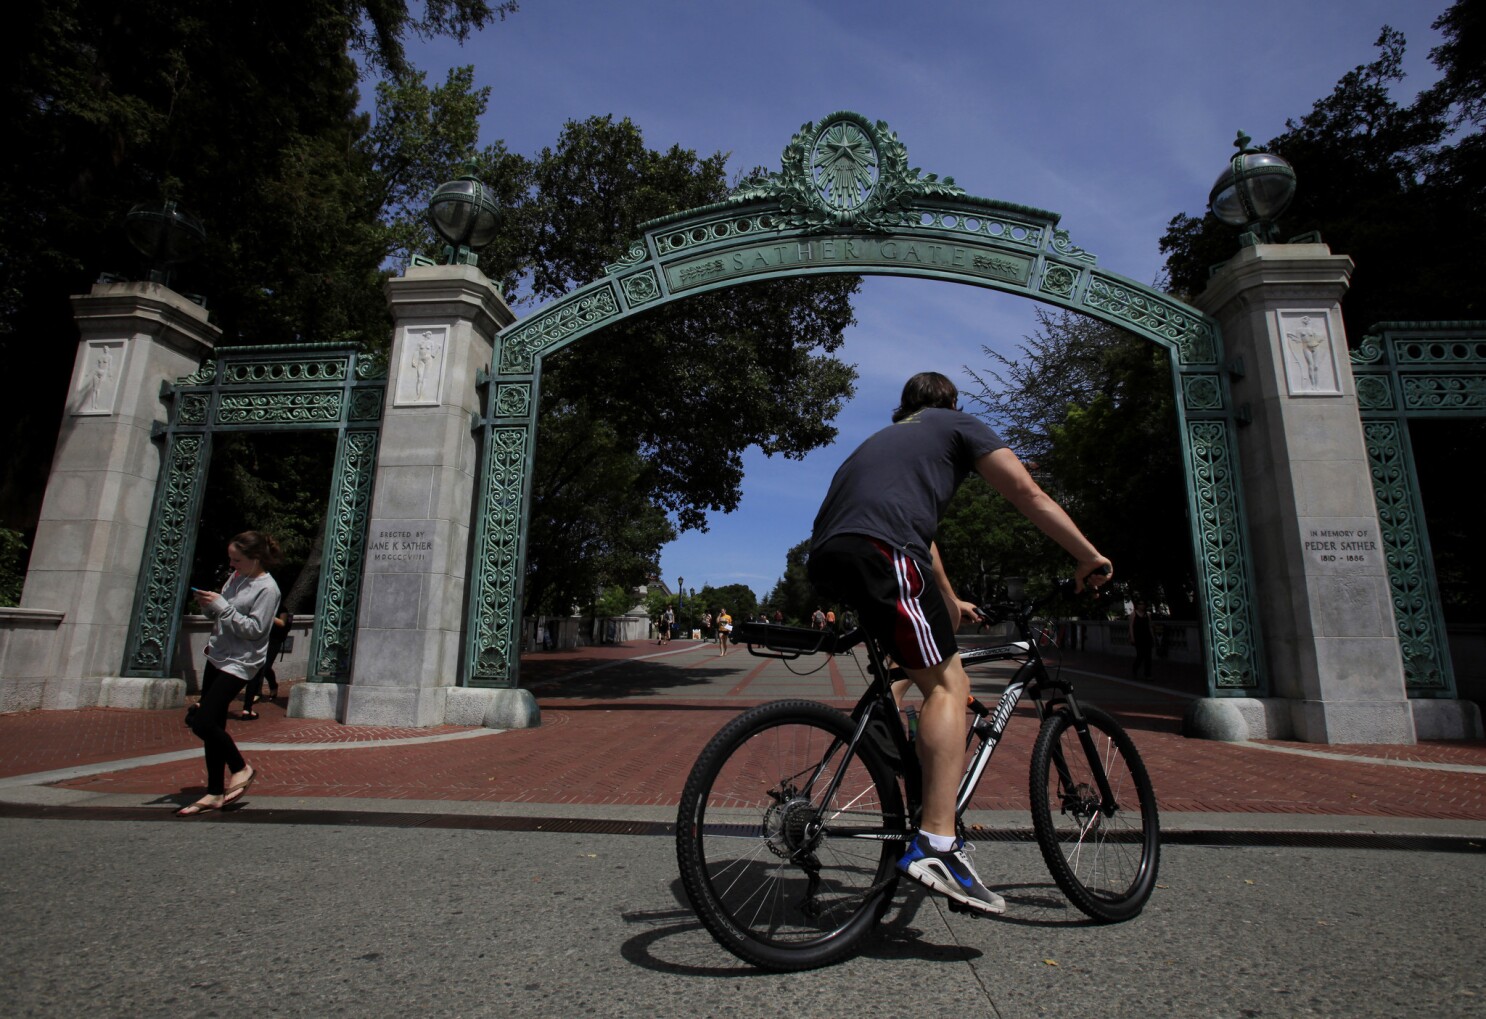 Op-Ed: Can a Dear Cal letter get you into Berkeley? - Los Angeles Times